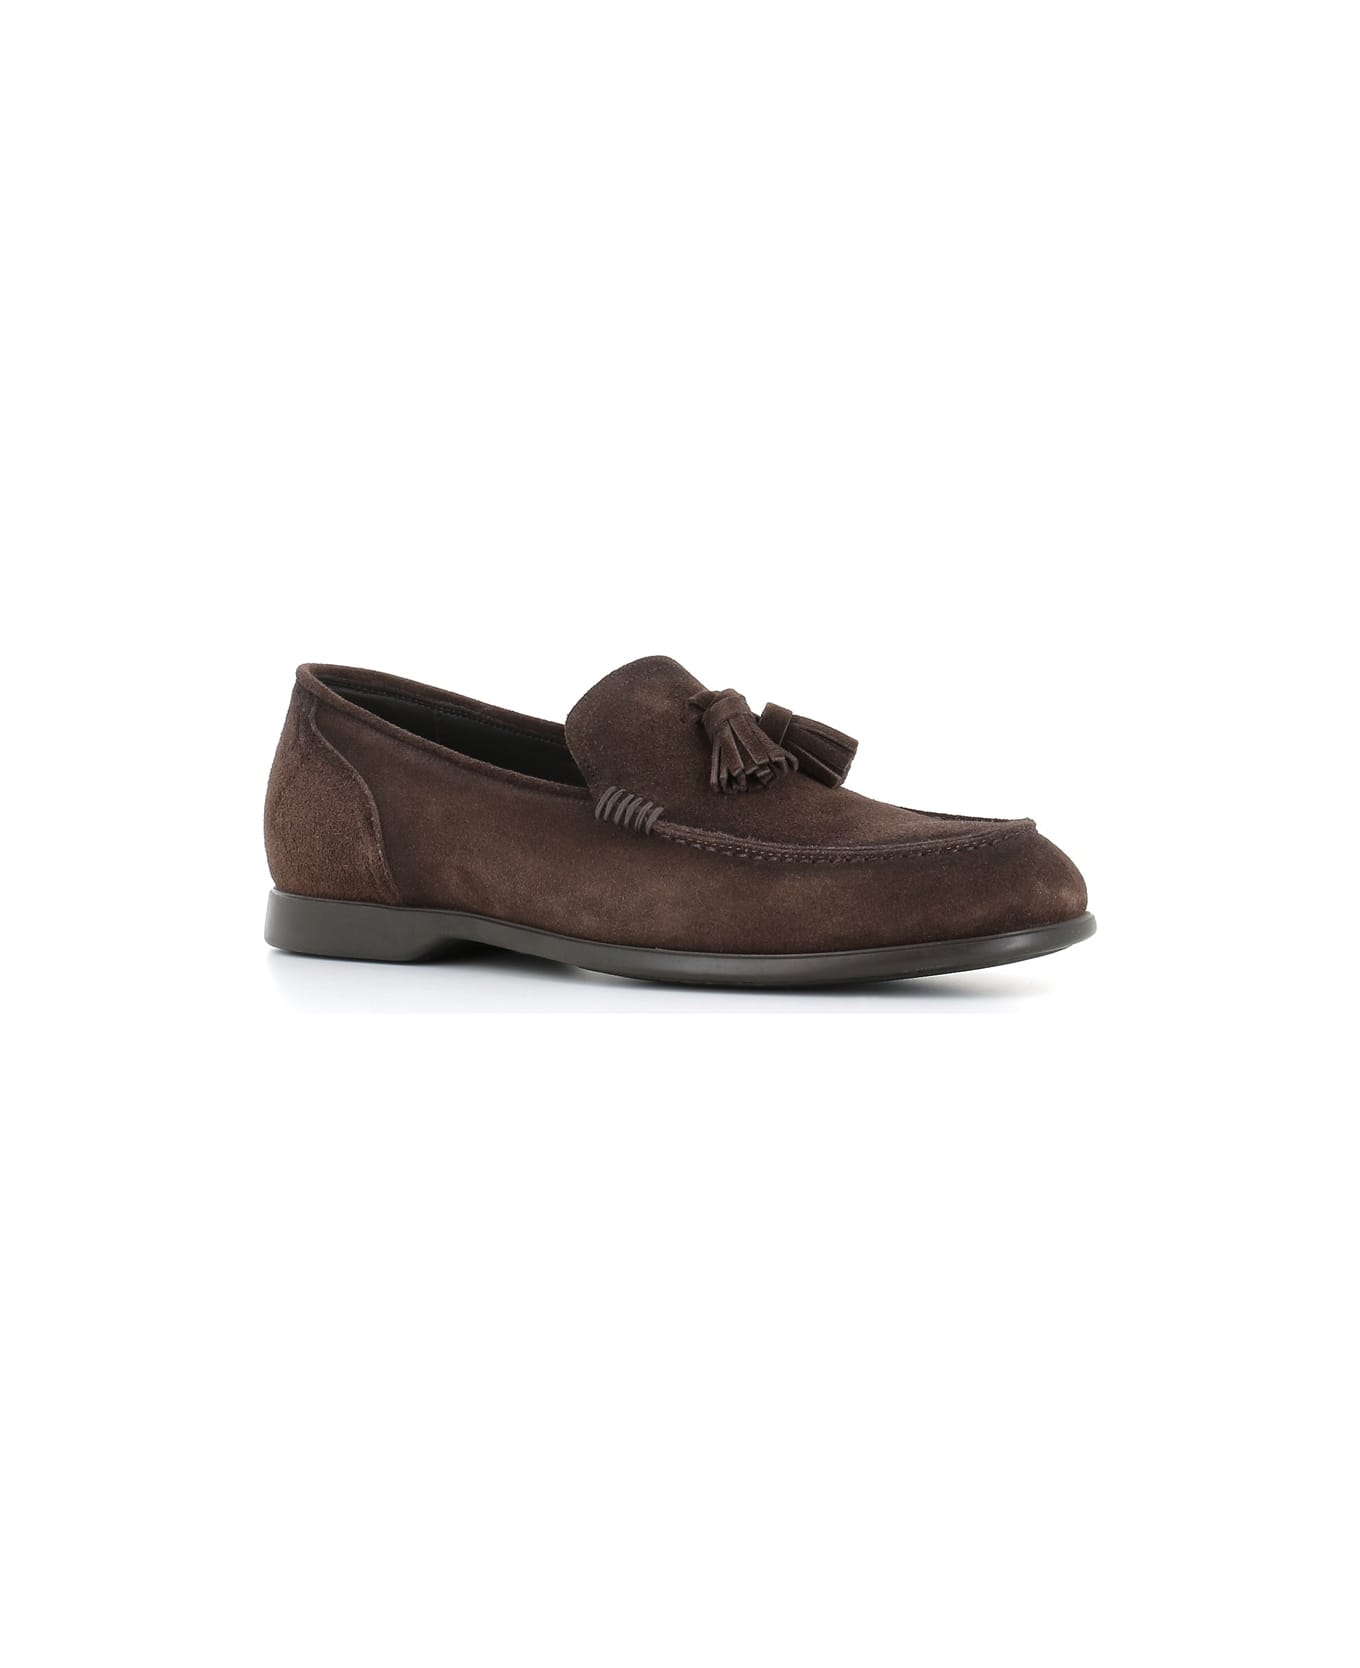 Pantanetti Tassel Loafer 17445a - Brown